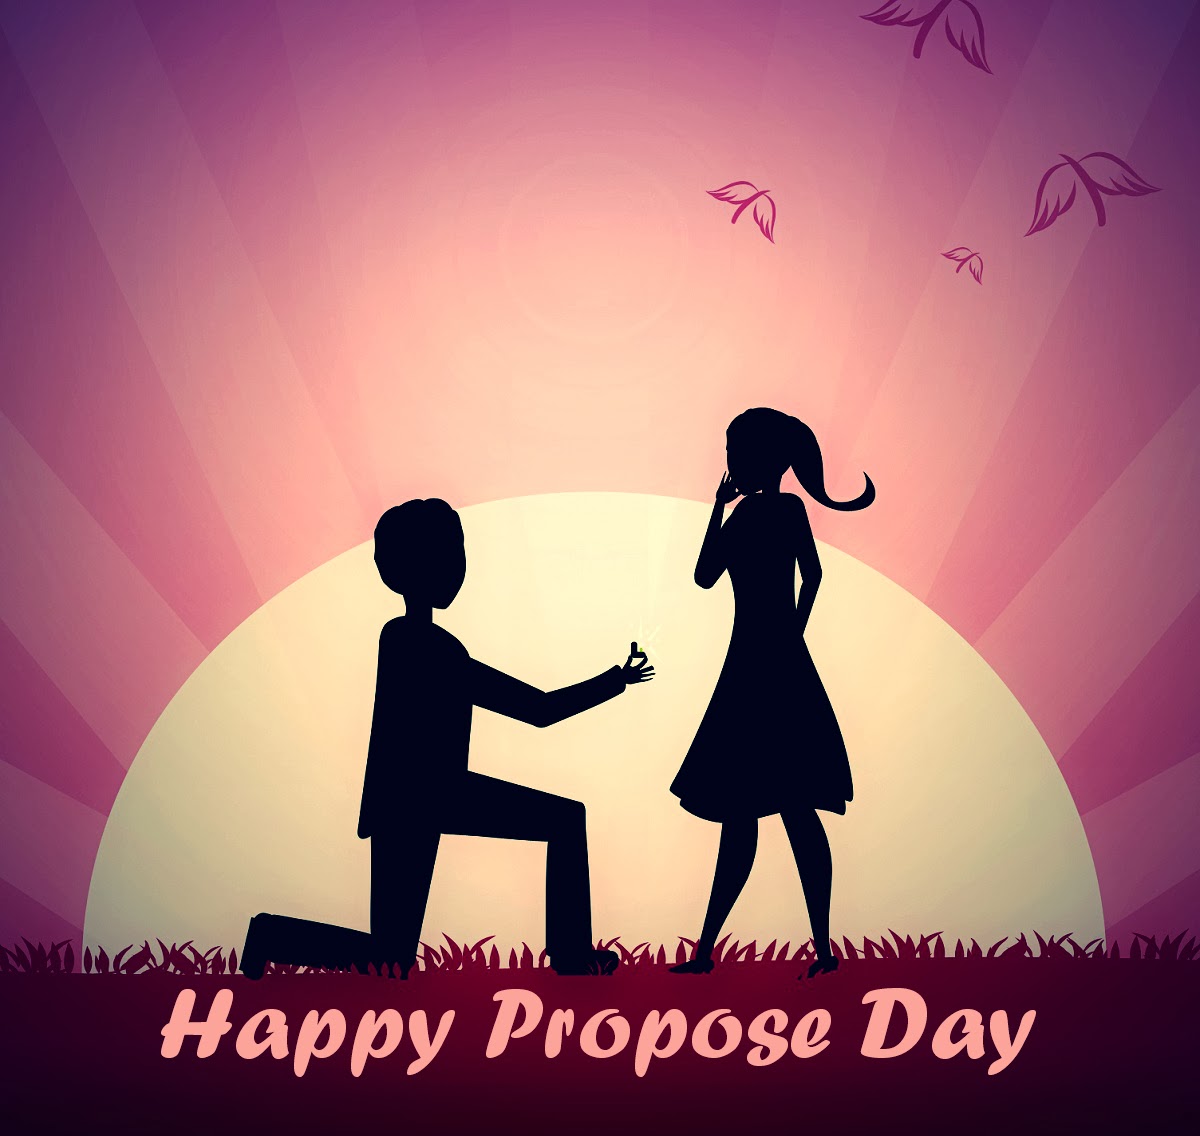 Free download Propose Day 2016 Wallpaper and Proposal images ...